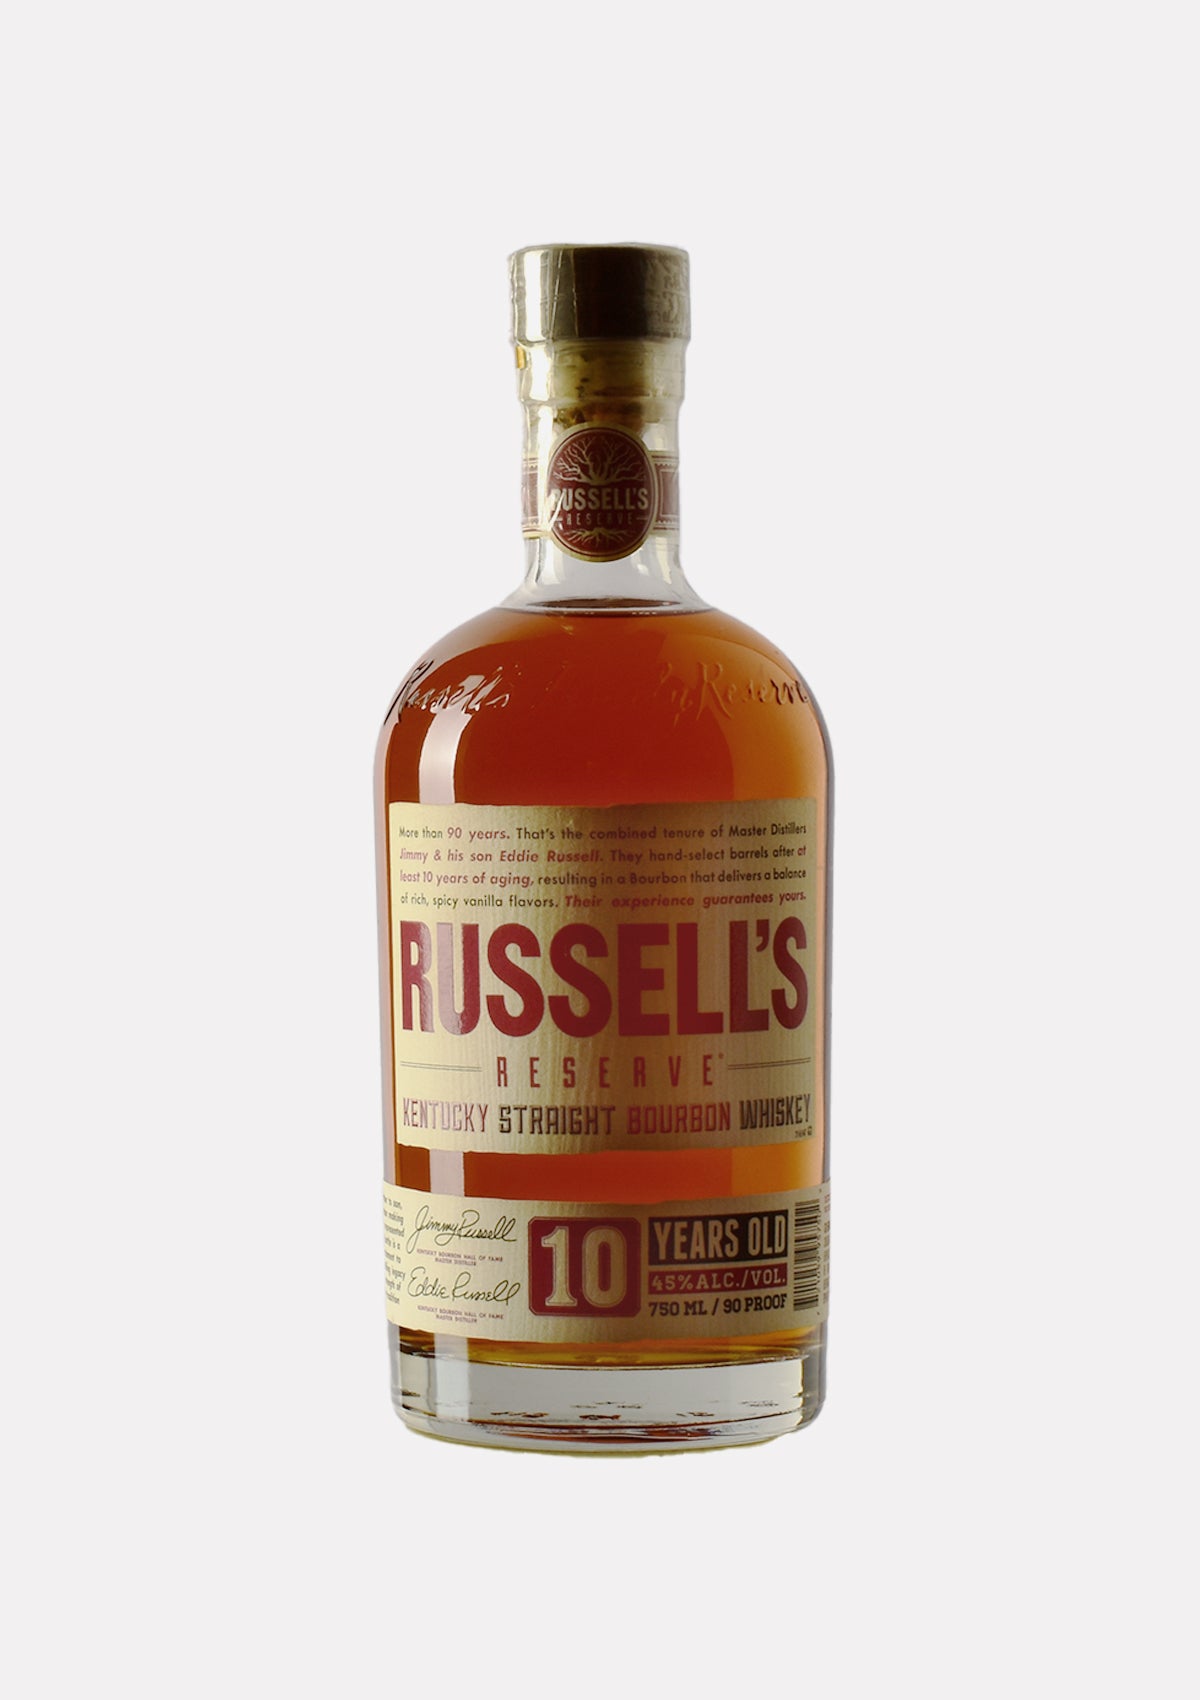 Russel's Reserve Kentucky Straight Bourbon Whiskey 10 years